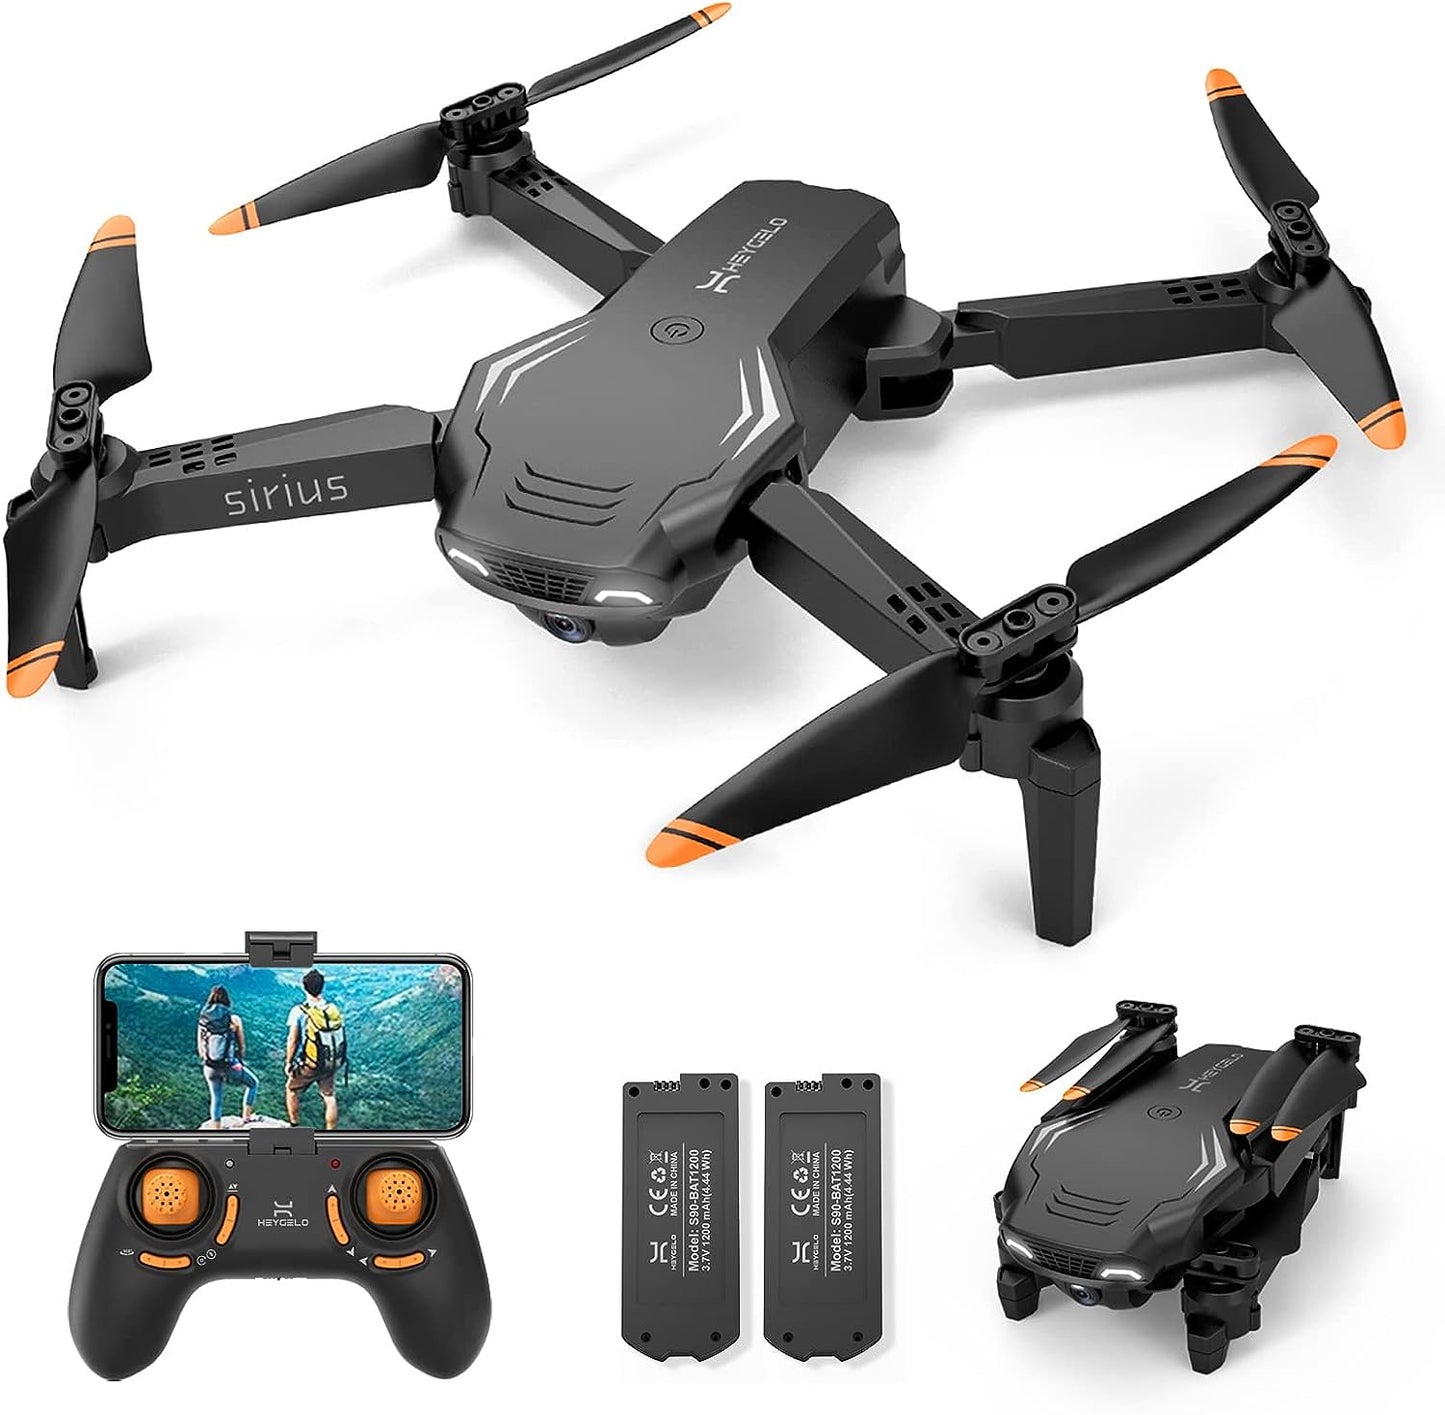 S90 Drone with Camera for Adults, 1080P HD Mini FPV Drones for Kids Beginners, Foldable RC Quadcopter Toys Gifts for Boys Girls with Altitude Hold, Voice/Gesture Control, 3 Speeds, 2 Batteries